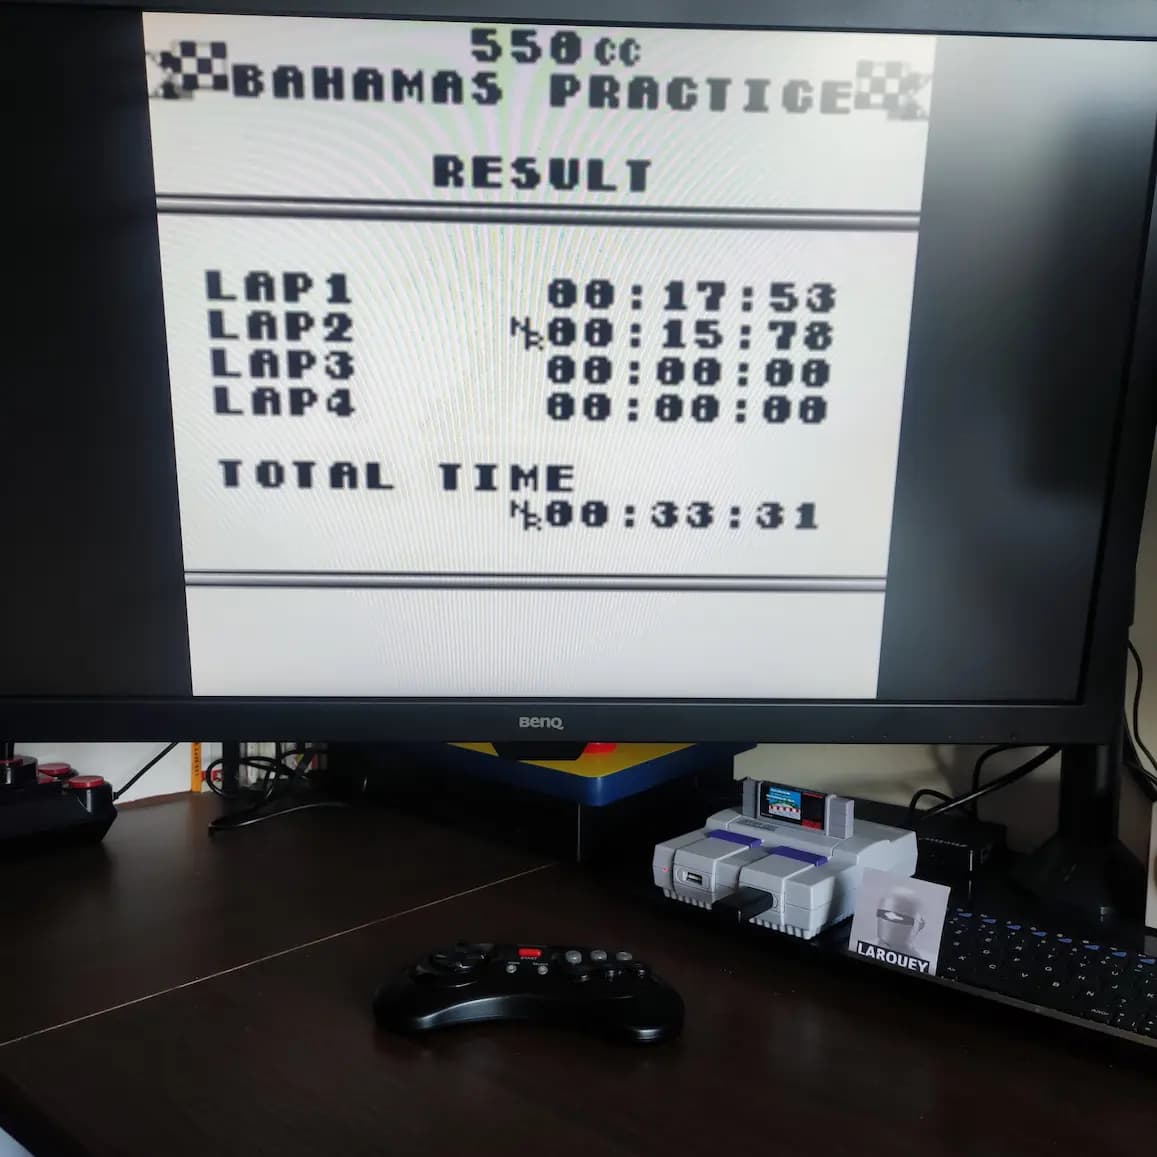 Larquey: Wave Race: Circuit 1: Bahamas [550cc][Total Time] (Game Boy Emulated) 0:00:33.31 points on 2022-08-04 03:56:30